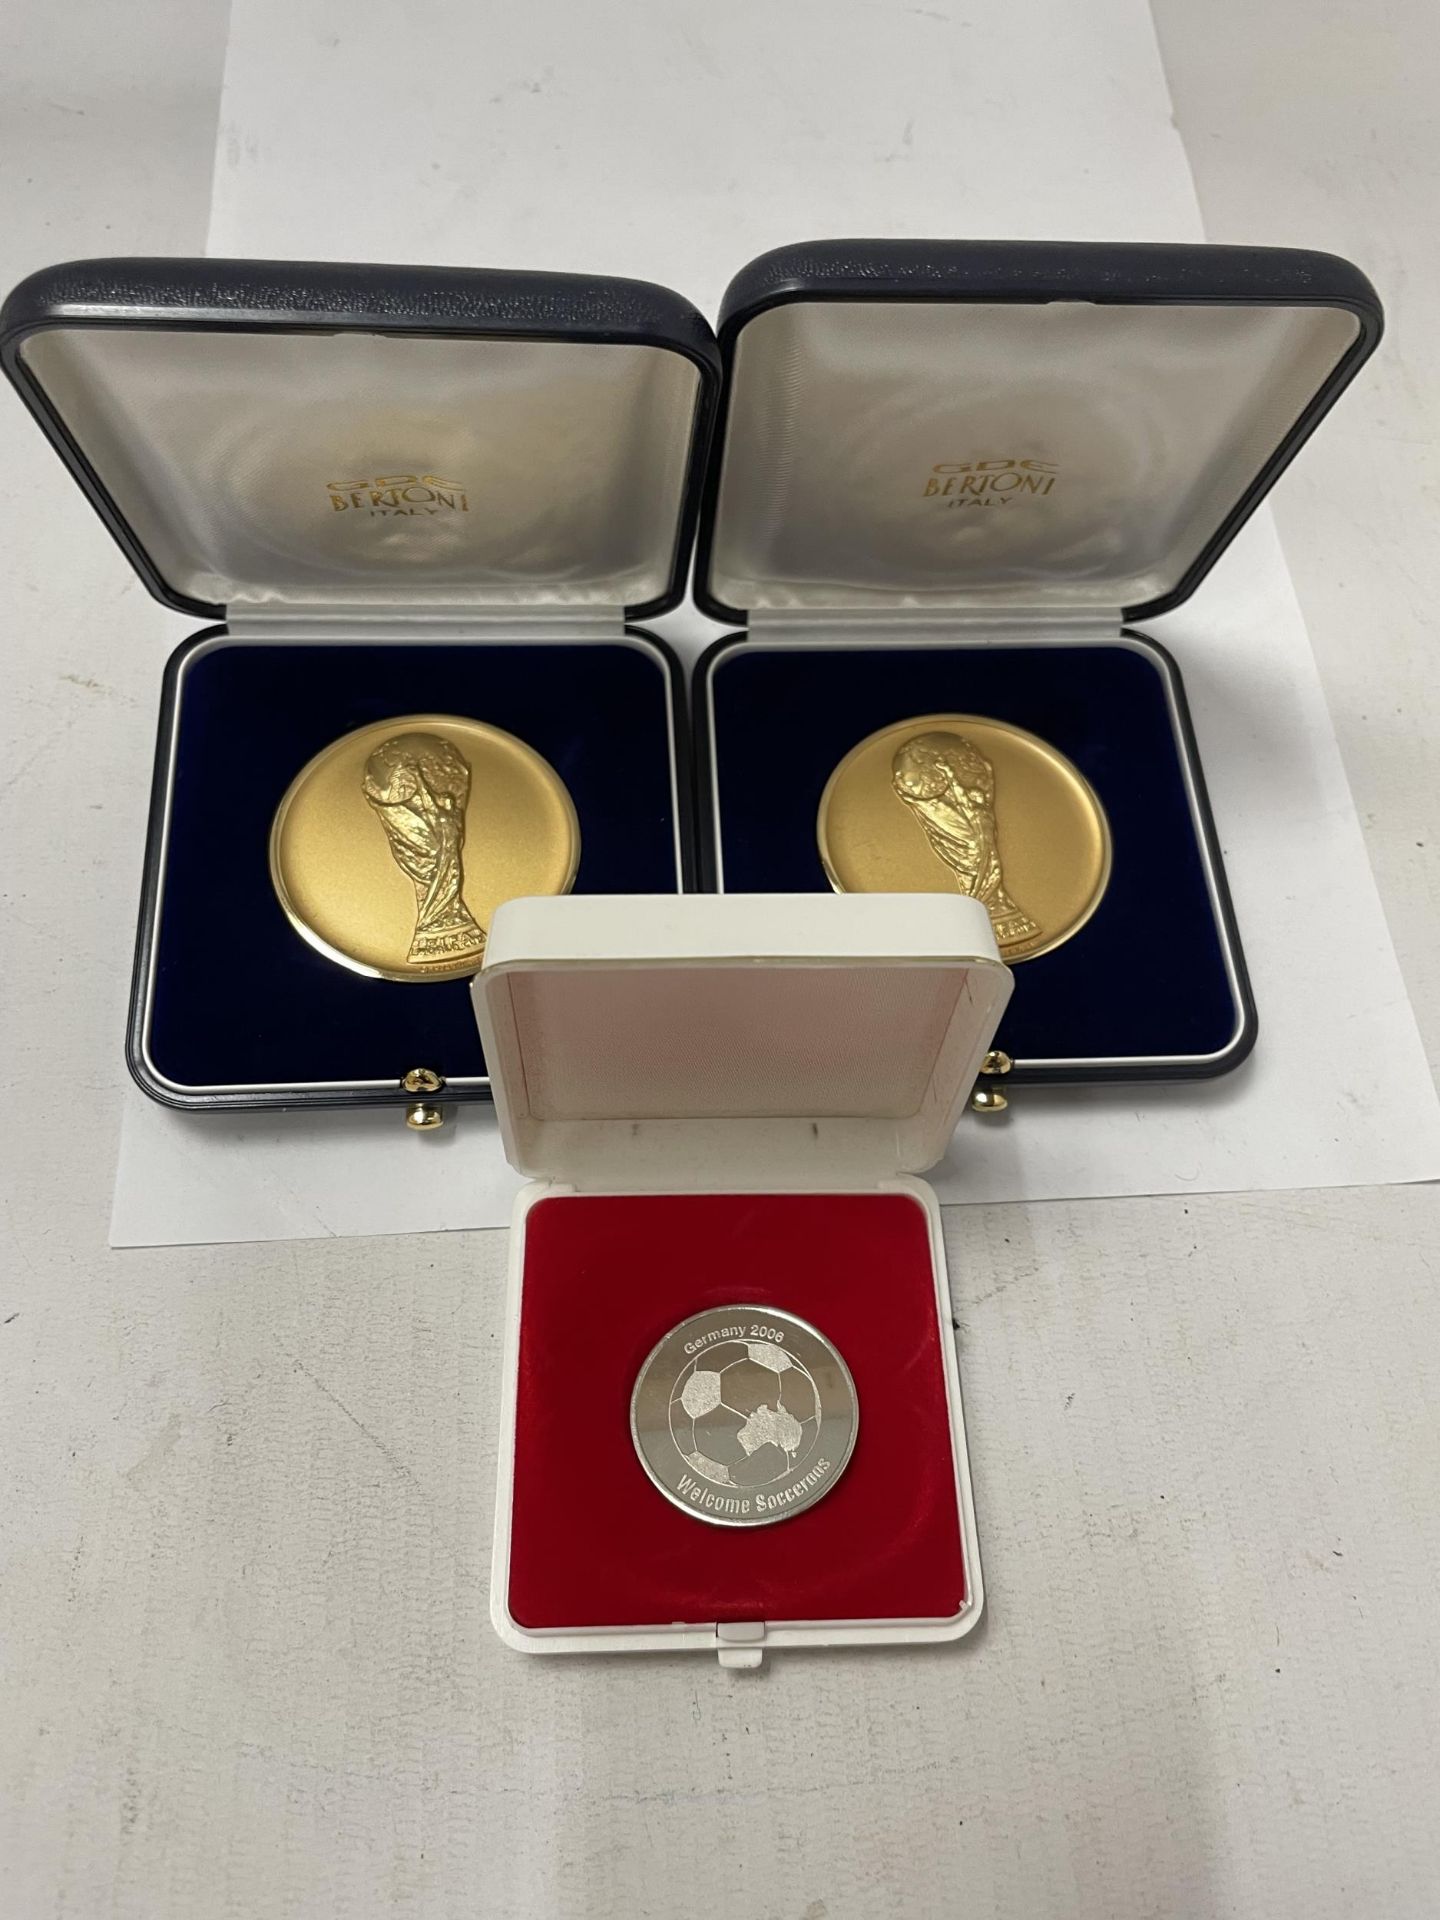 TWO CASED 2006 FIFA WORLD CUP PARTICIPANT FINAL COMPETITION MEDALS BY BERTONI, ITALY AND FURTHER